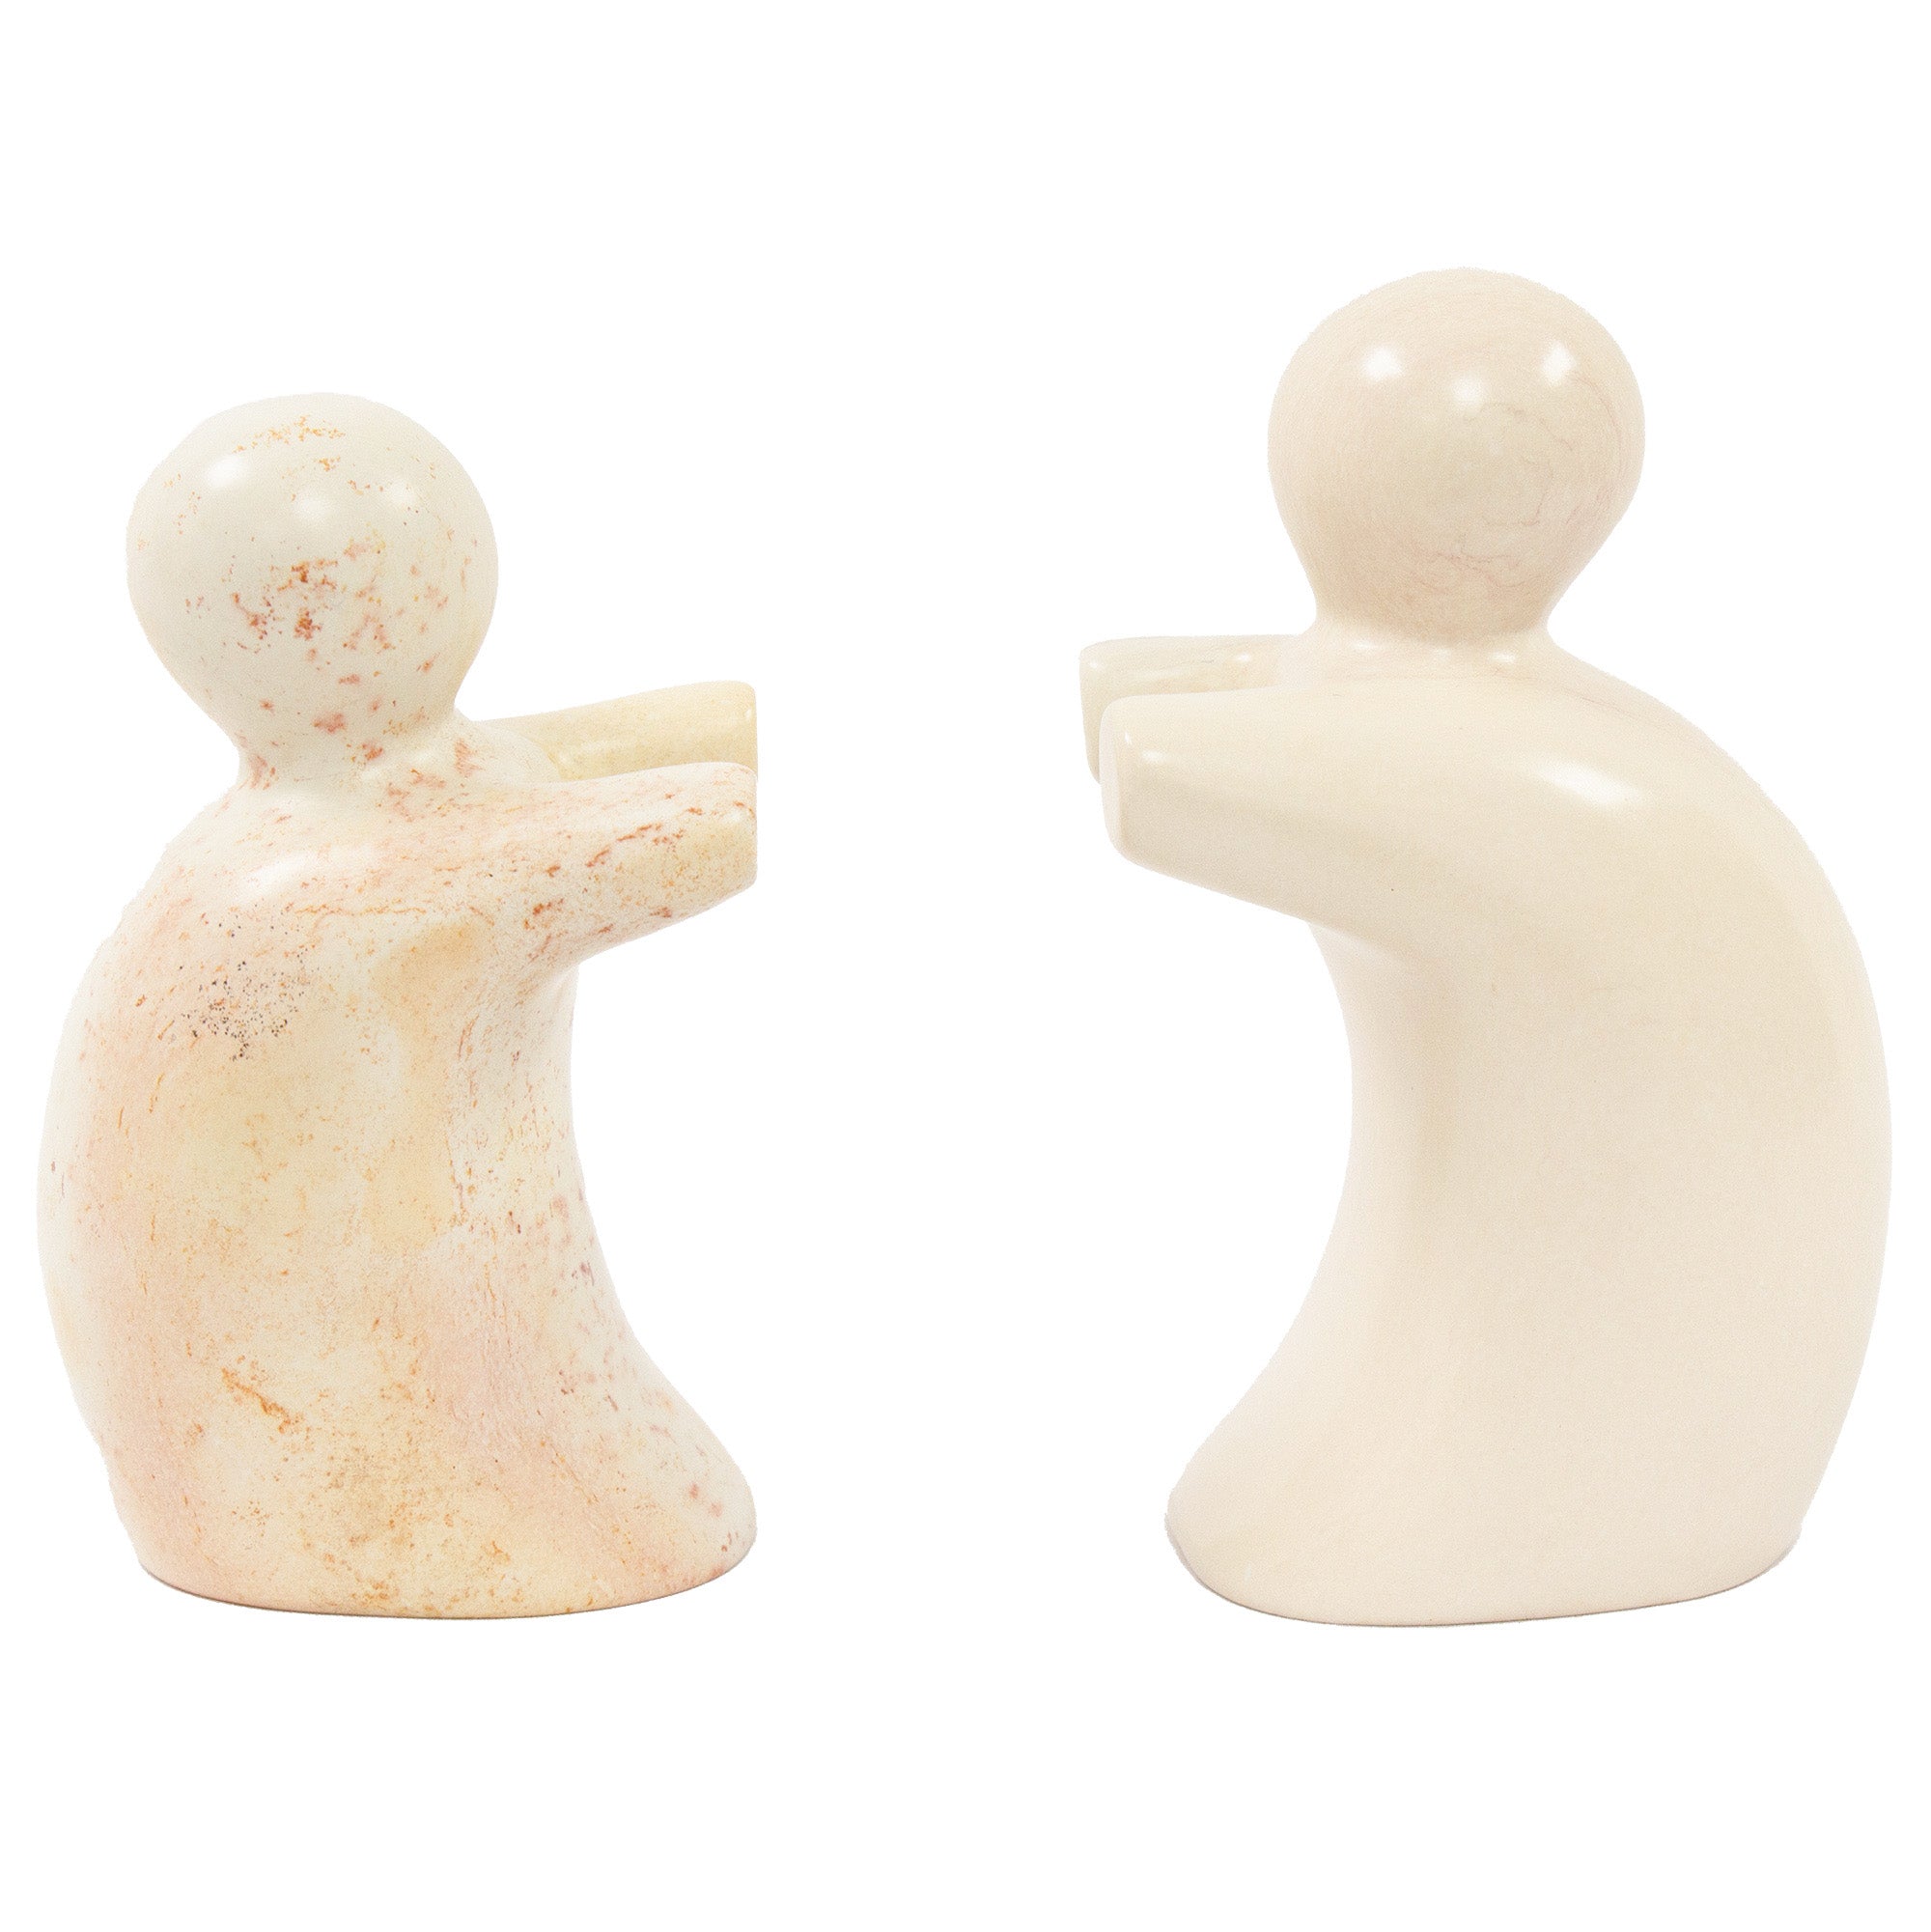 Soapstone Helping Hands Bookends